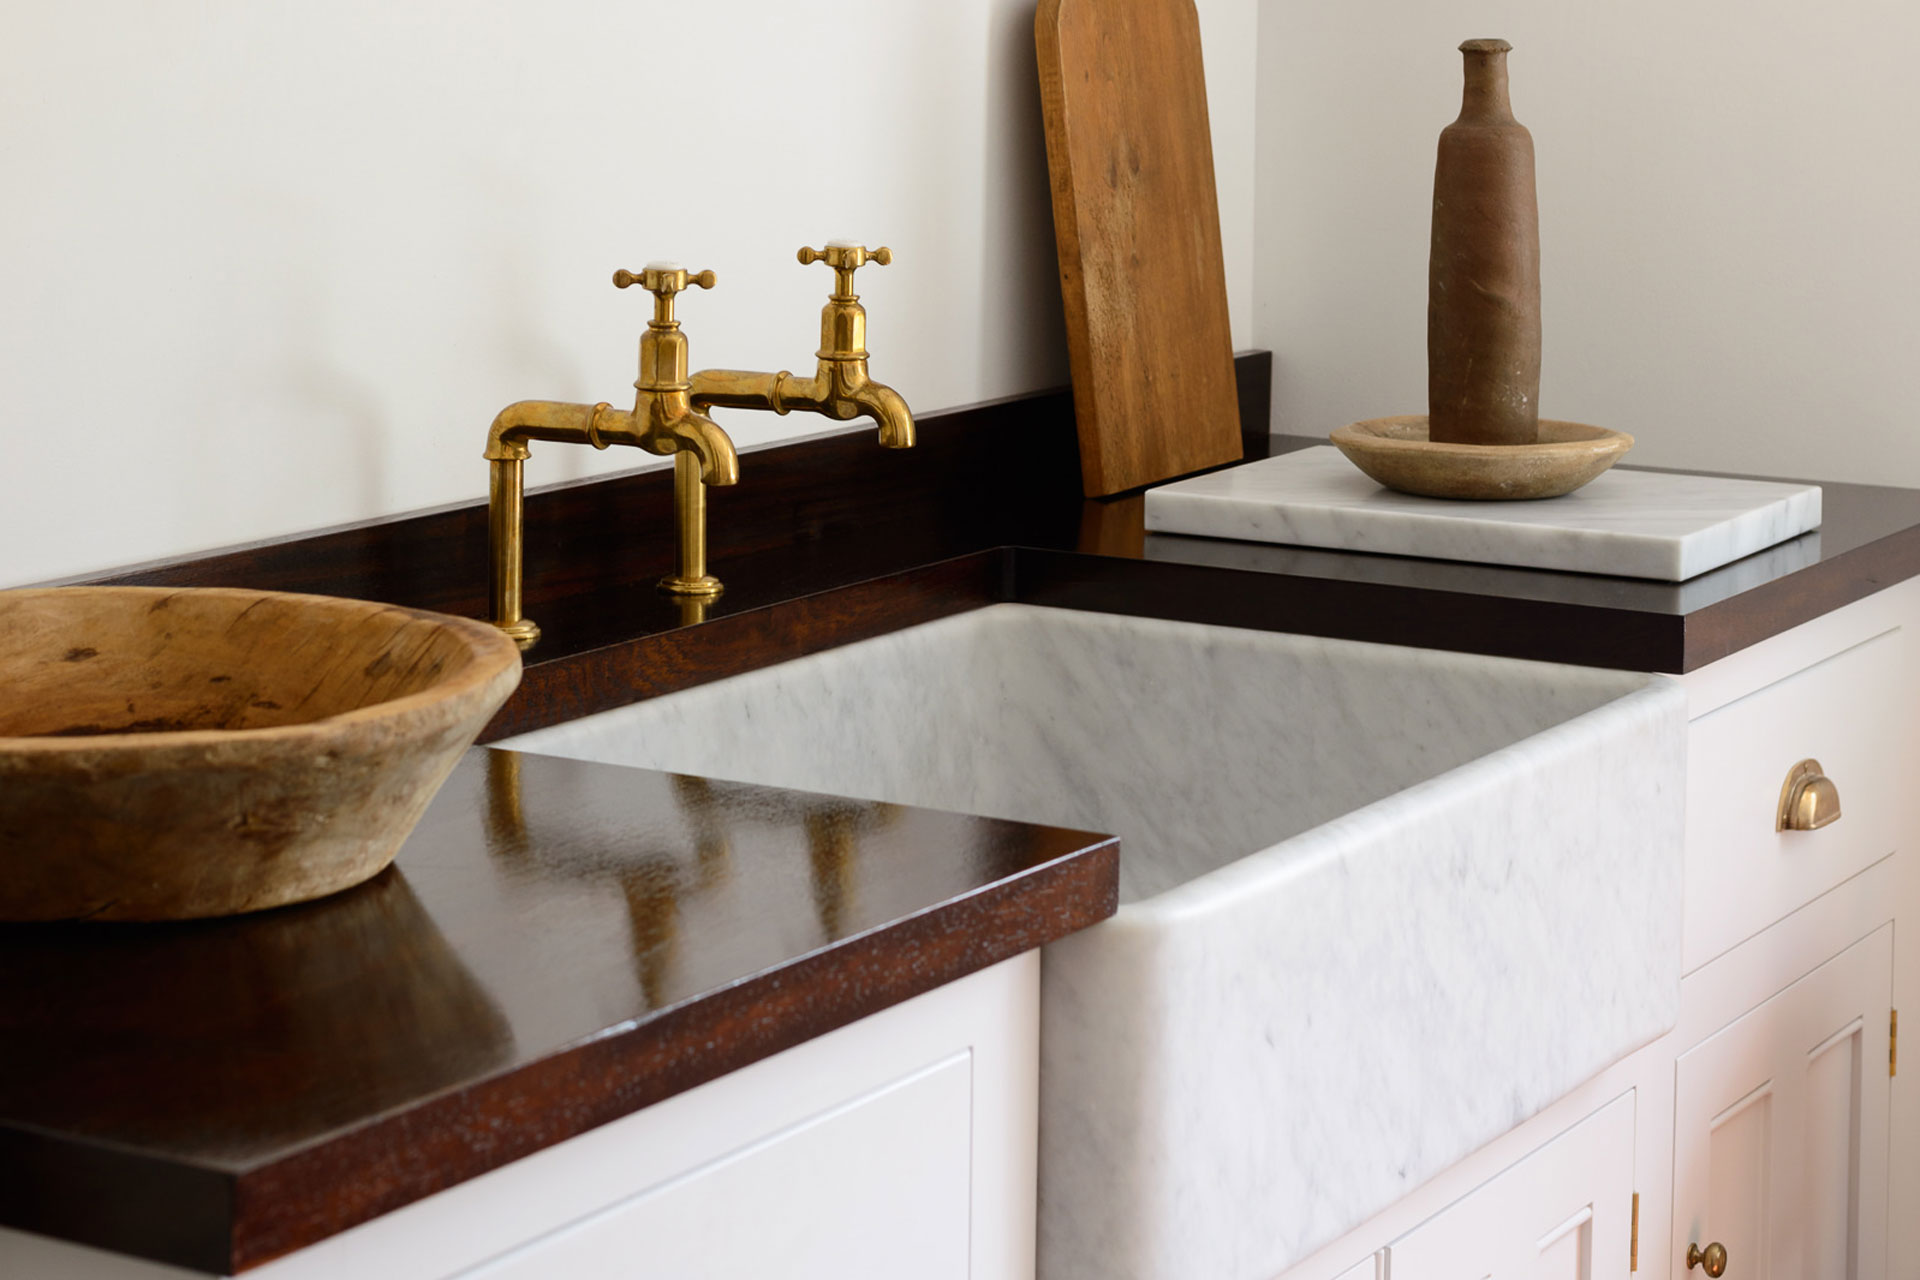 Countertop with marble sink and brass taps.